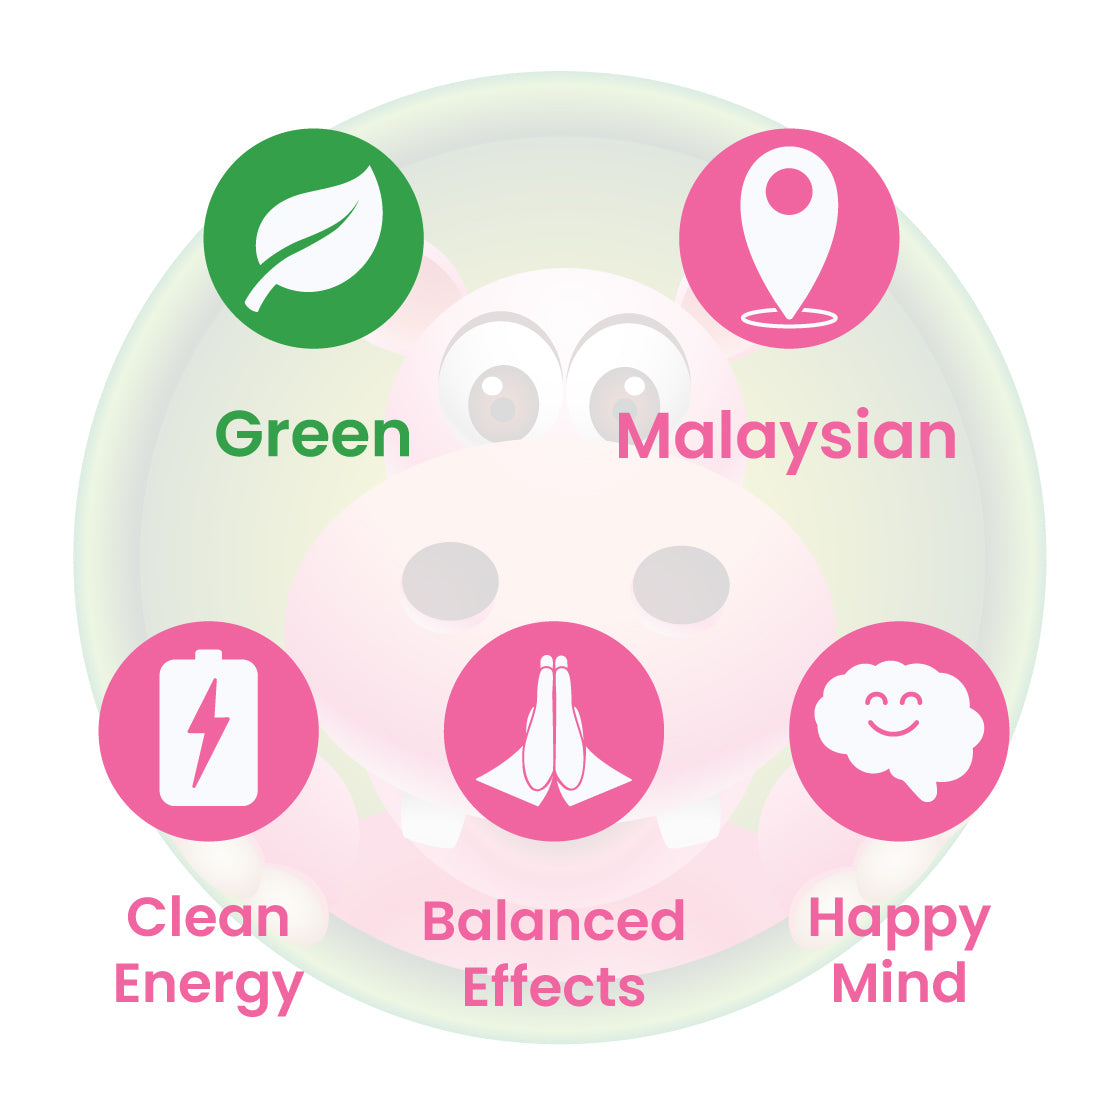 Infographic Details for Happy Hippo Green Malay Kratom Powder. Leaf color: Green Vein. Kratom Strain Origin: Malaysian. Kratom Effects resonate with Clean Energy, Happy Mind, and Balanced Effects.